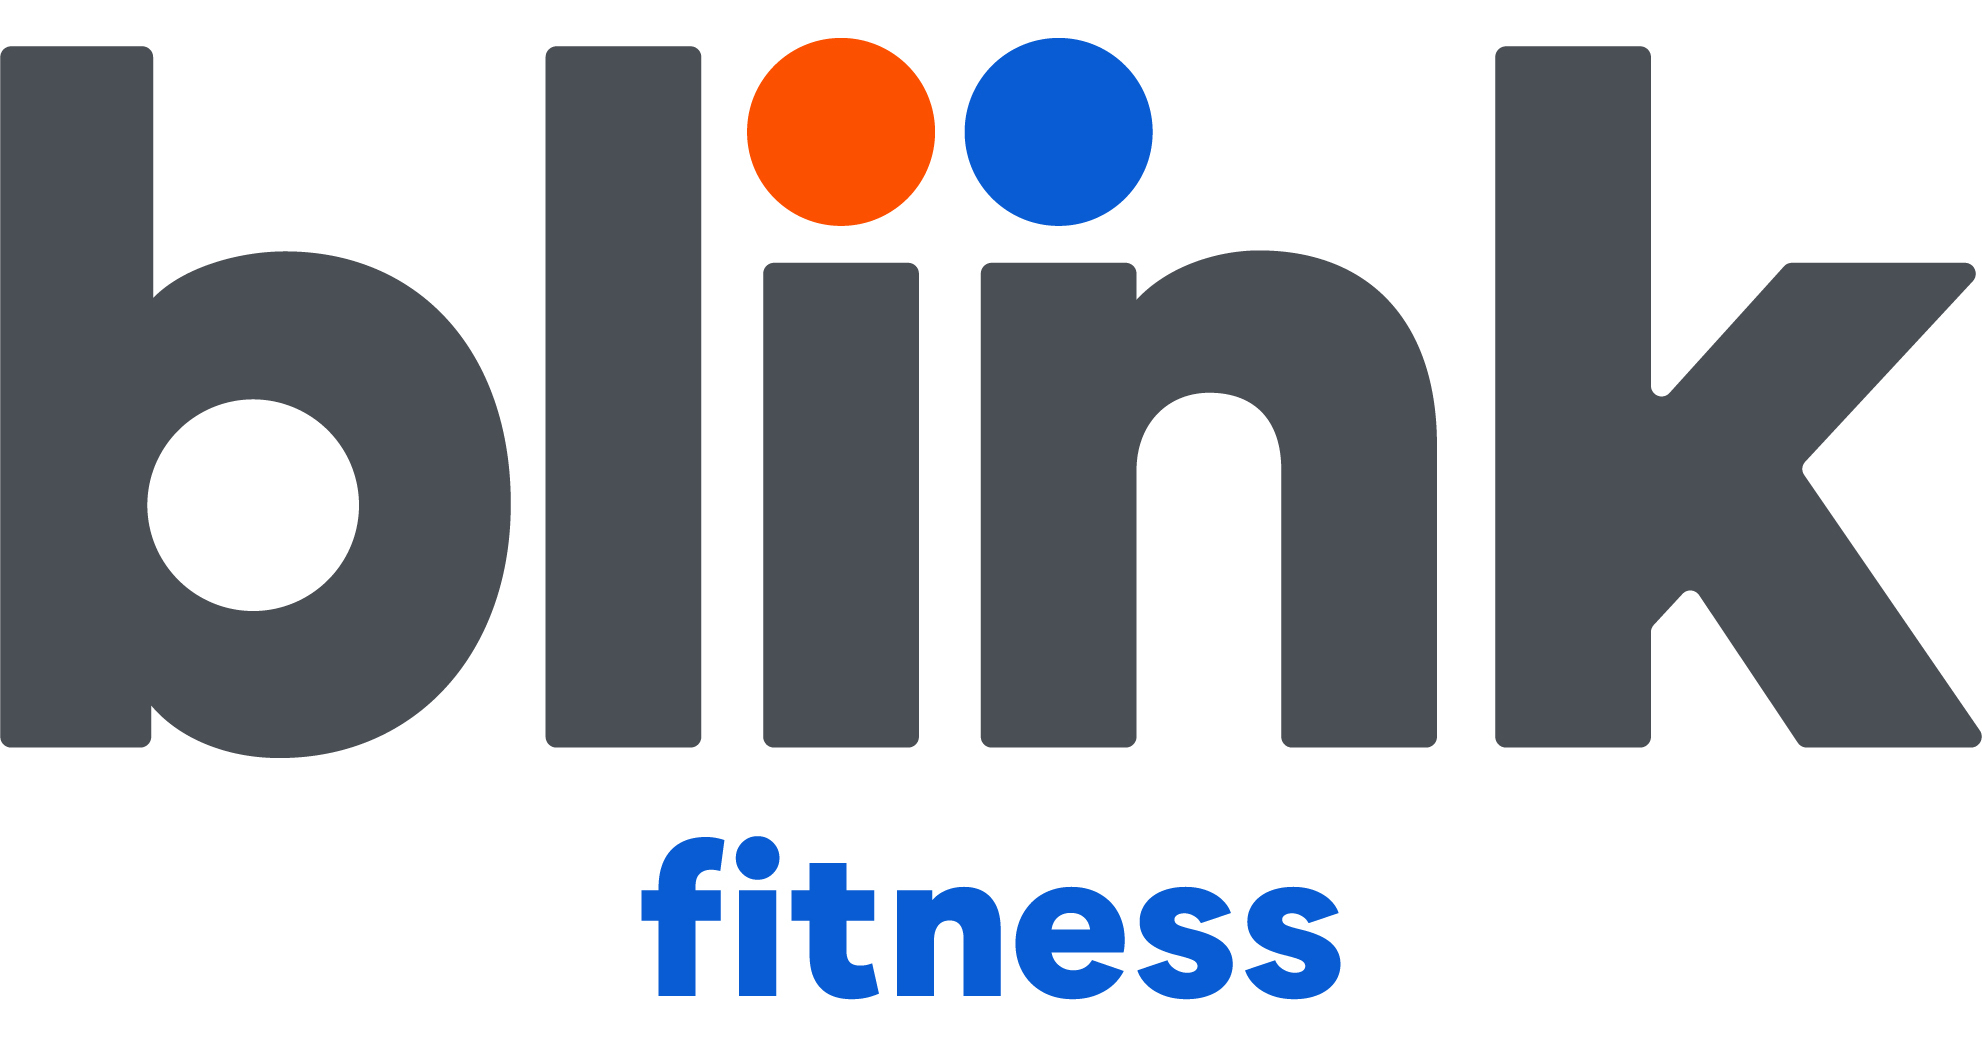 Want To Win At Your 2023 Resolutions? Blink Fitness Says To Break Them Down Into Micro-goals And Celebrate Each Tiny Win